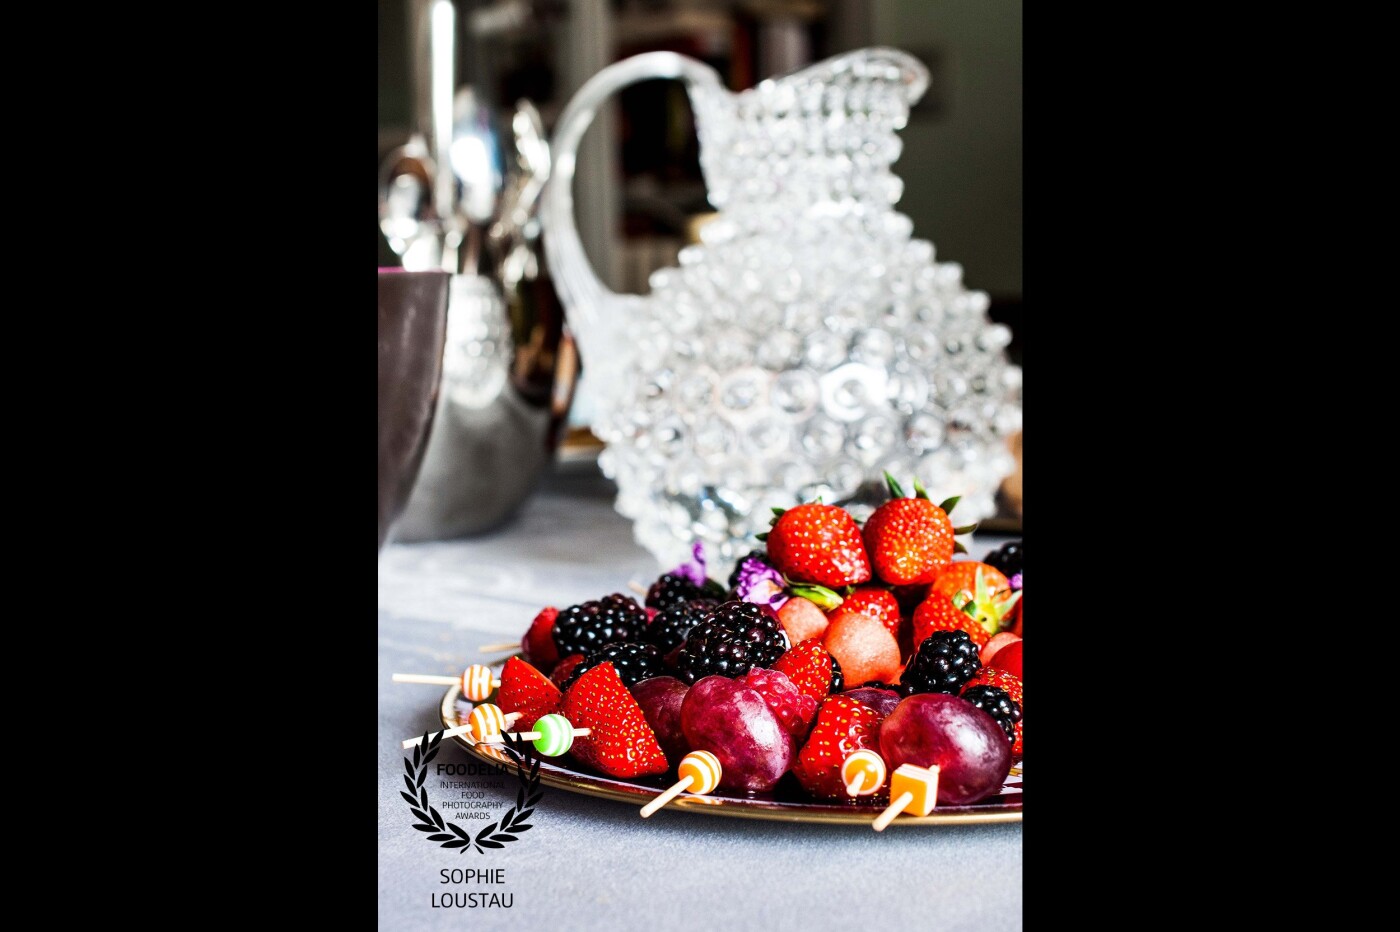 Strawberries, grapes, blackberries, fruit skewers prepared by french Chef-Traiteur Jérôme Roux, on a private birthday. <br />
Day Light. 